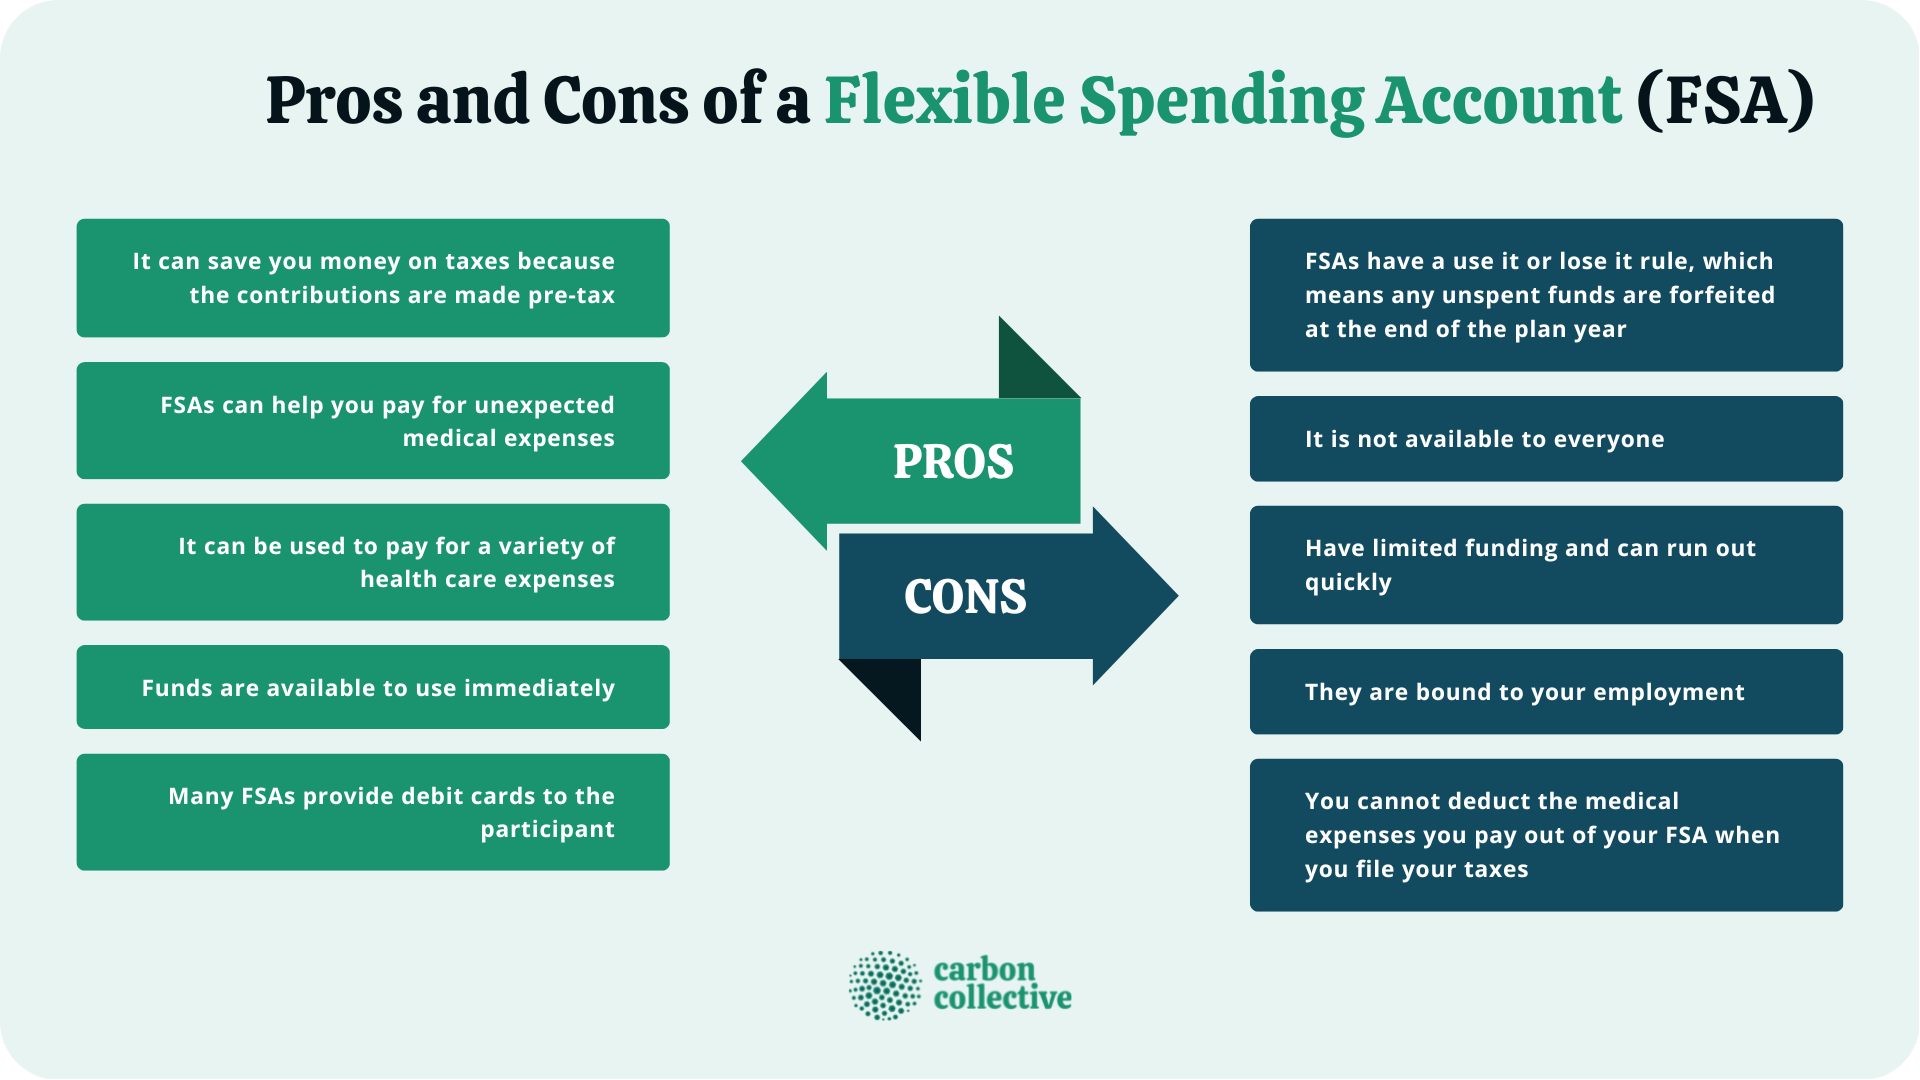 https://www.carboncollective.co/hs-fs/hubfs/Pros_and_Cons_of_a_Flexible_Spending_Account_(FSA).png?width=1920&height=1080&name=Pros_and_Cons_of_a_Flexible_Spending_Account_(FSA).png